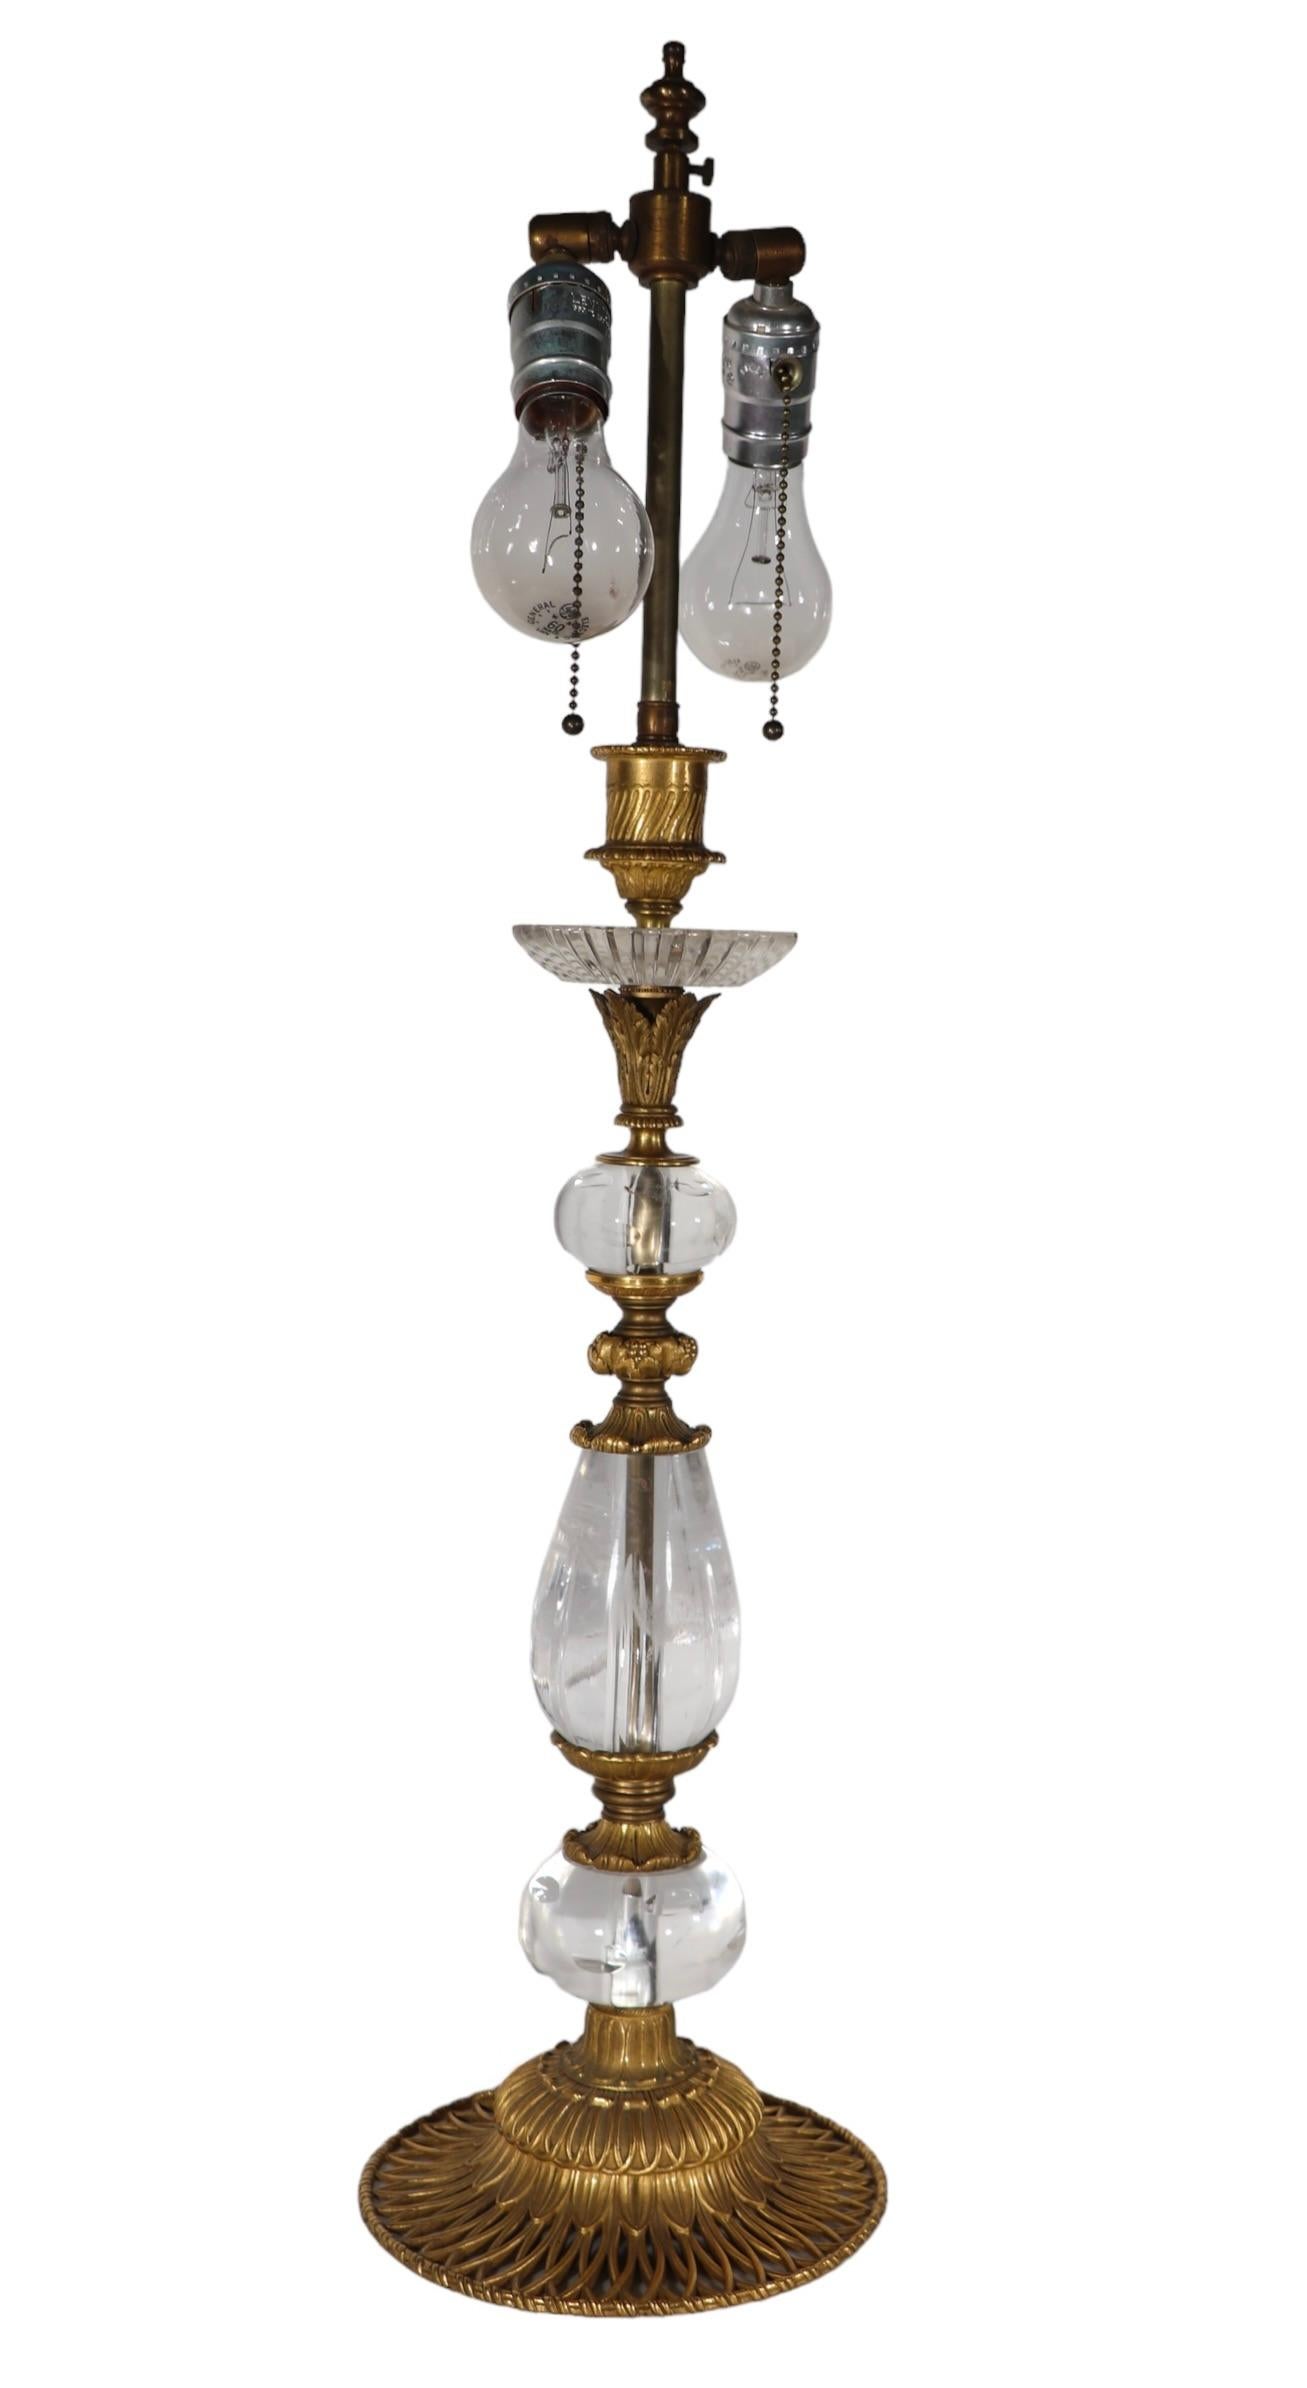   19th C French Bronze Ormolu and Rock Crystal Candlestick Table Lamp as is For Sale 5